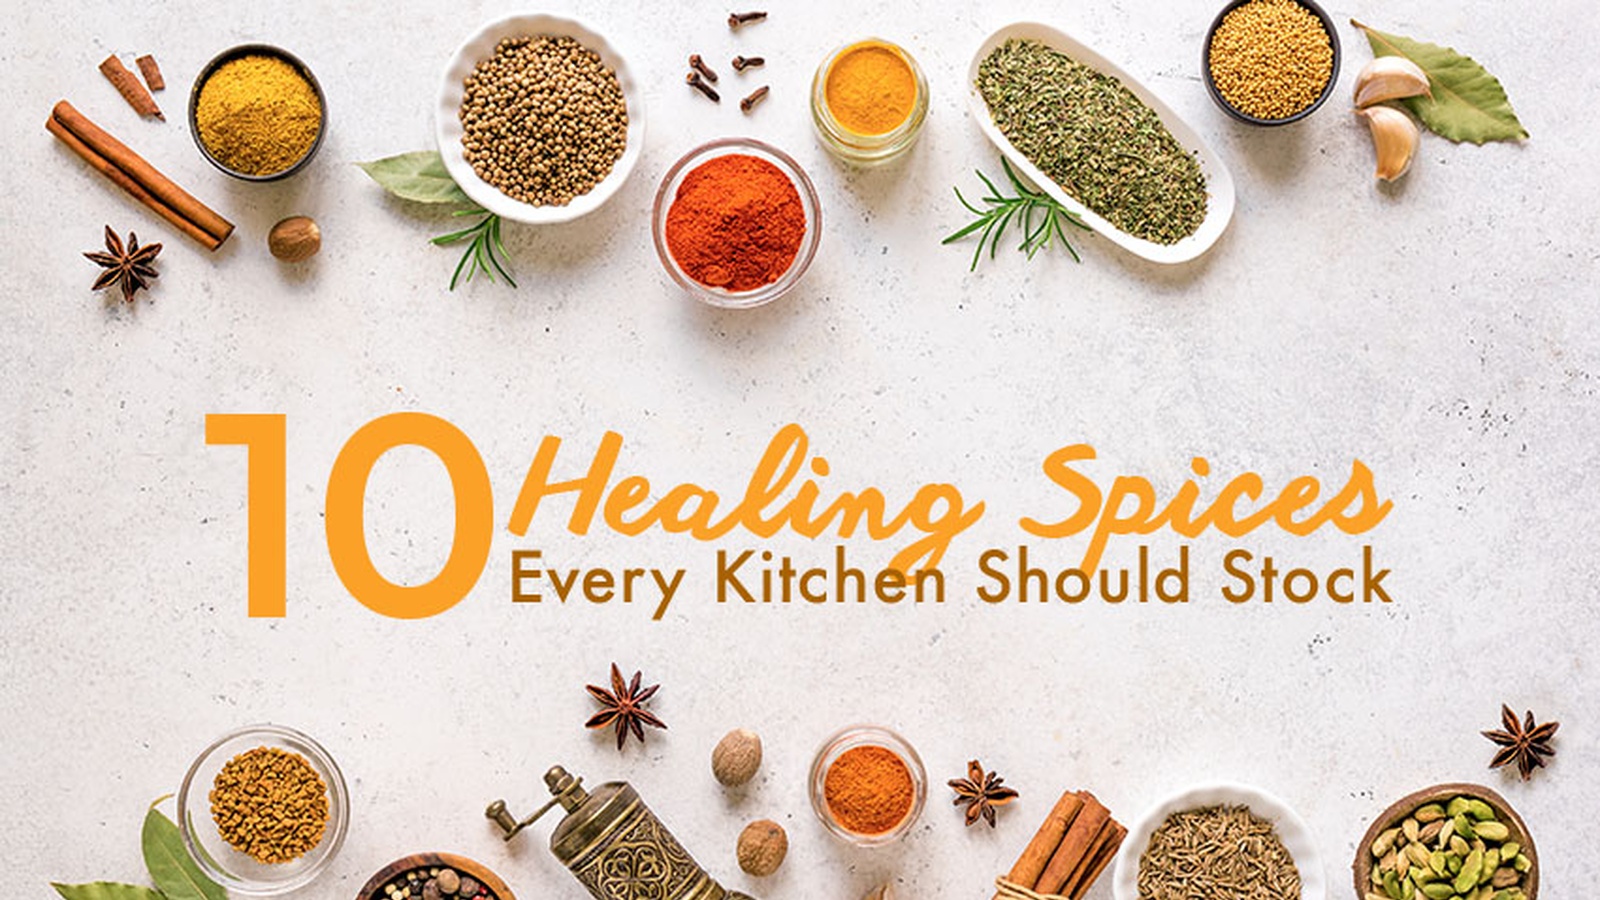 10 Healing Spices Every Kitchen Should Stock